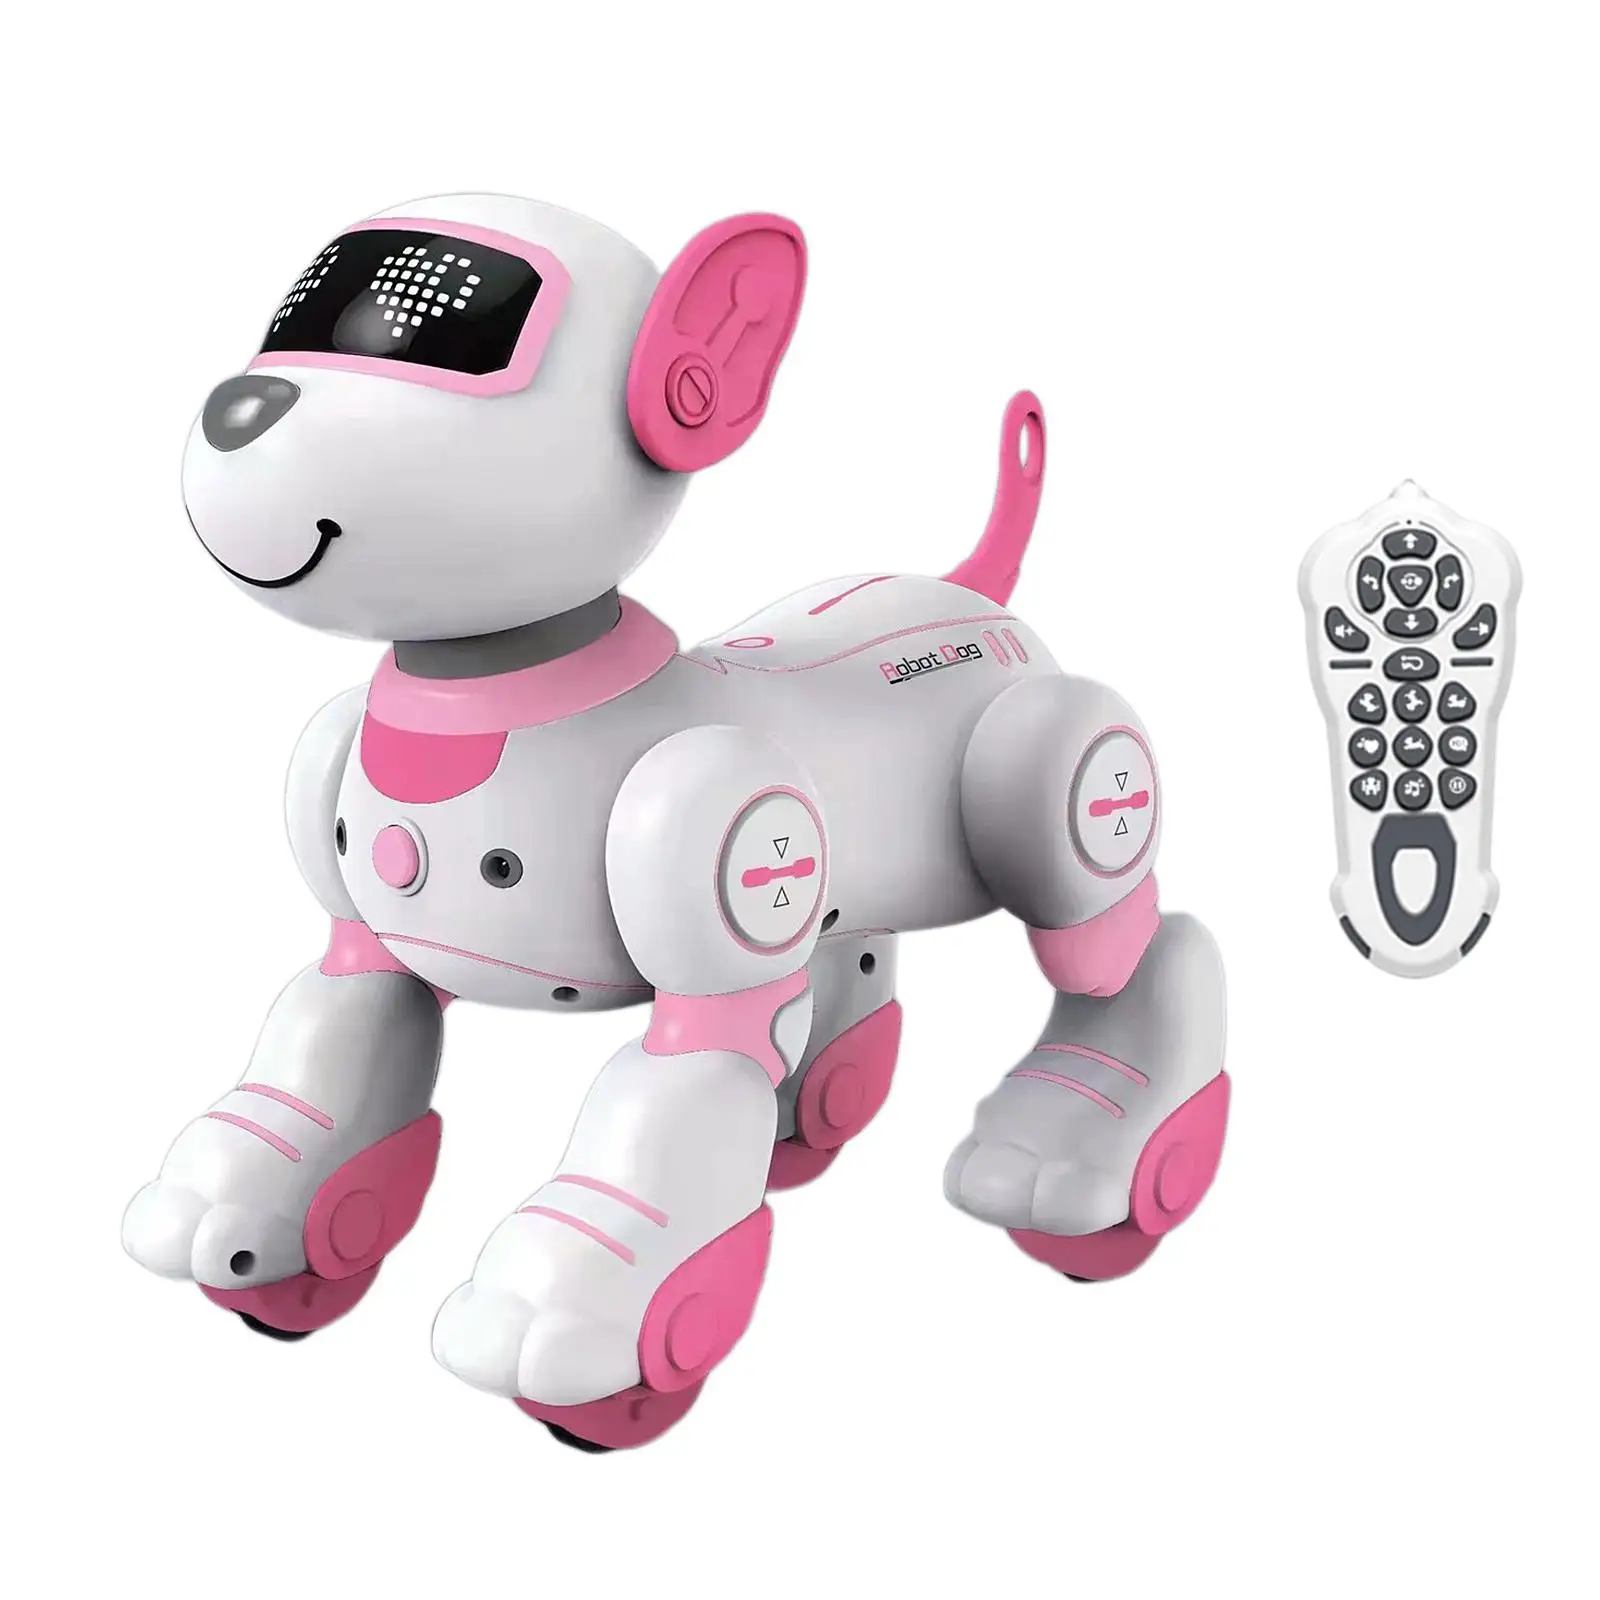 Robot Puppy Dog Toy Toys Robotic Pet Toy Remote Control for Toddlers